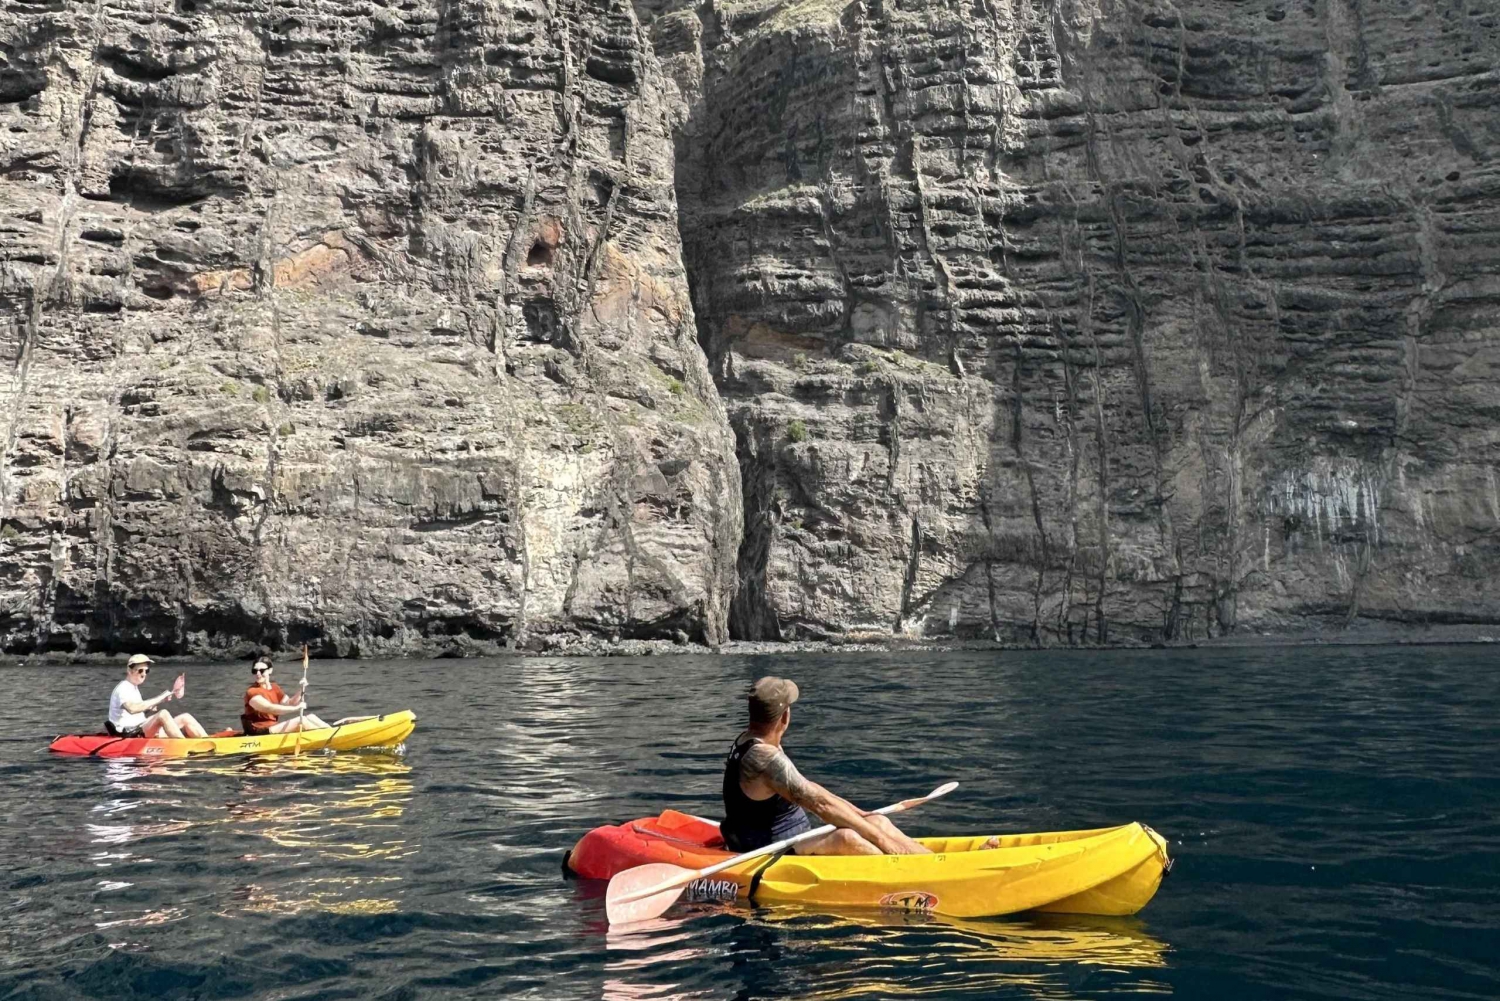 Private Kayak Tour at the feet of the Giant Cliffs